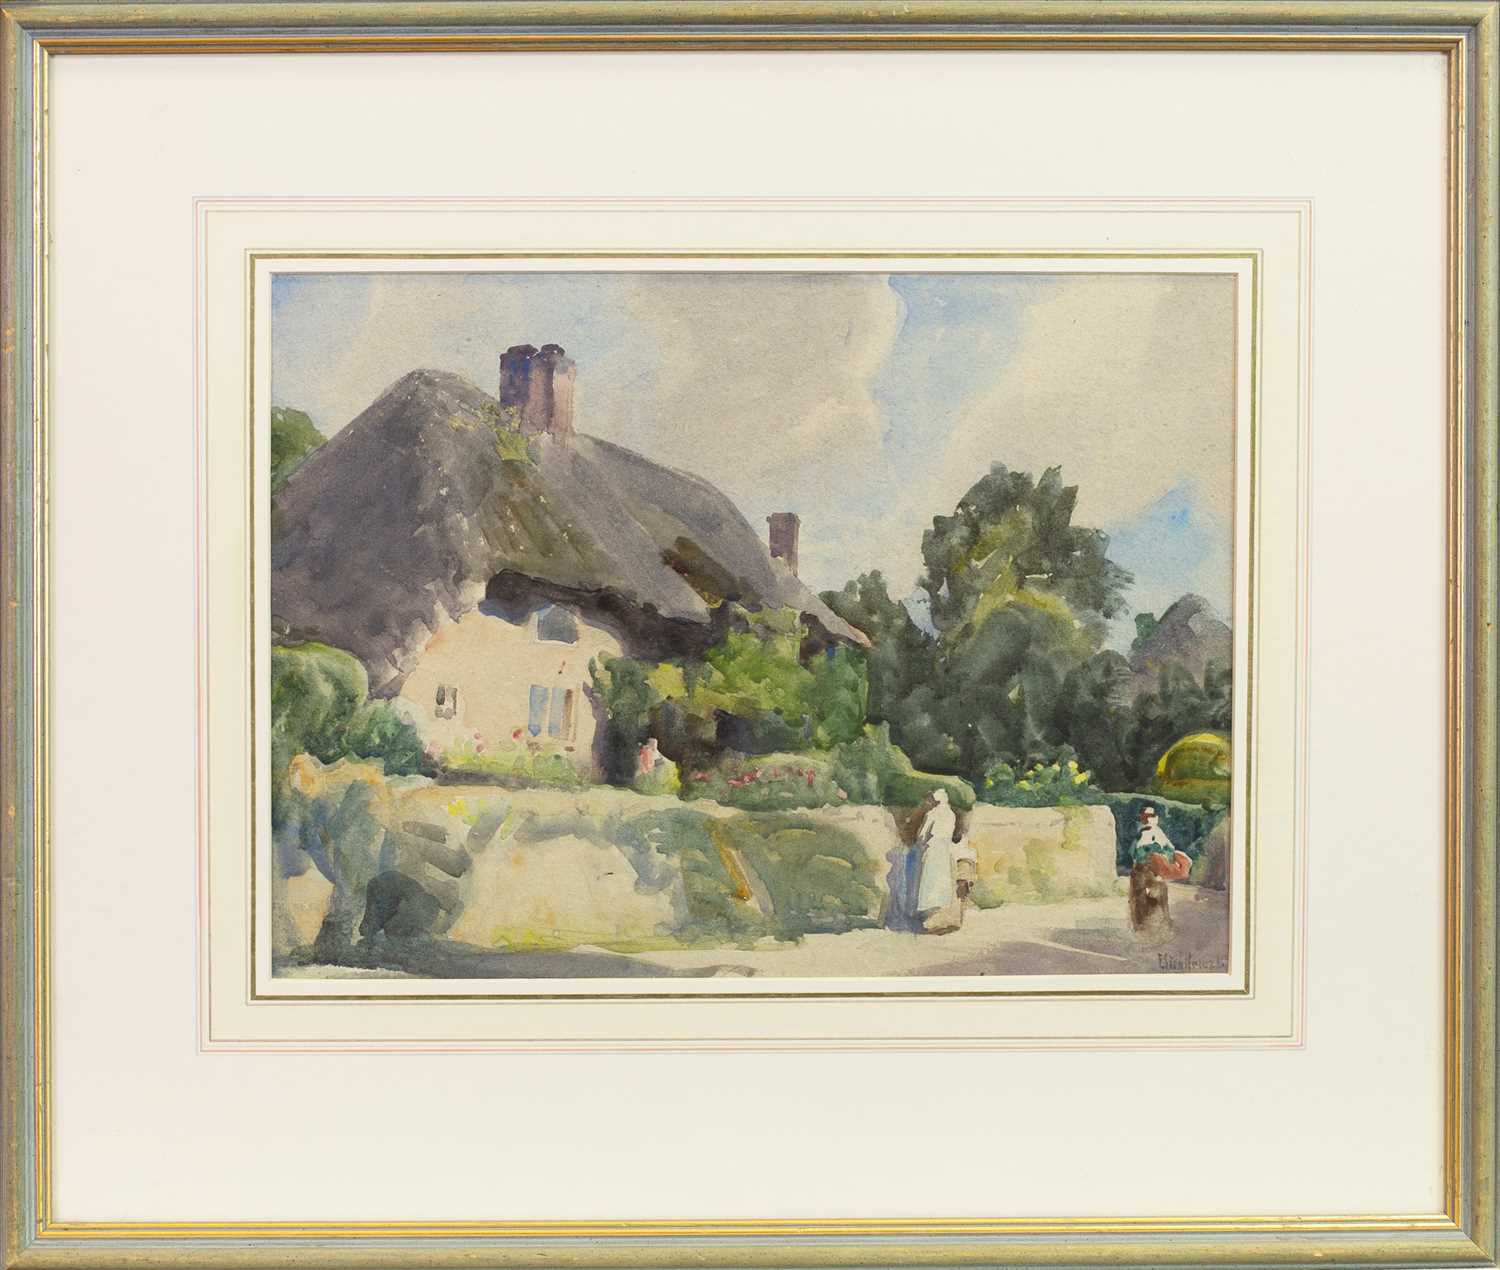 Lot 437 - FIGURES BY A THATCHED COTTAGE, A WATERCOLOUR BY FREDERICK STRATTON